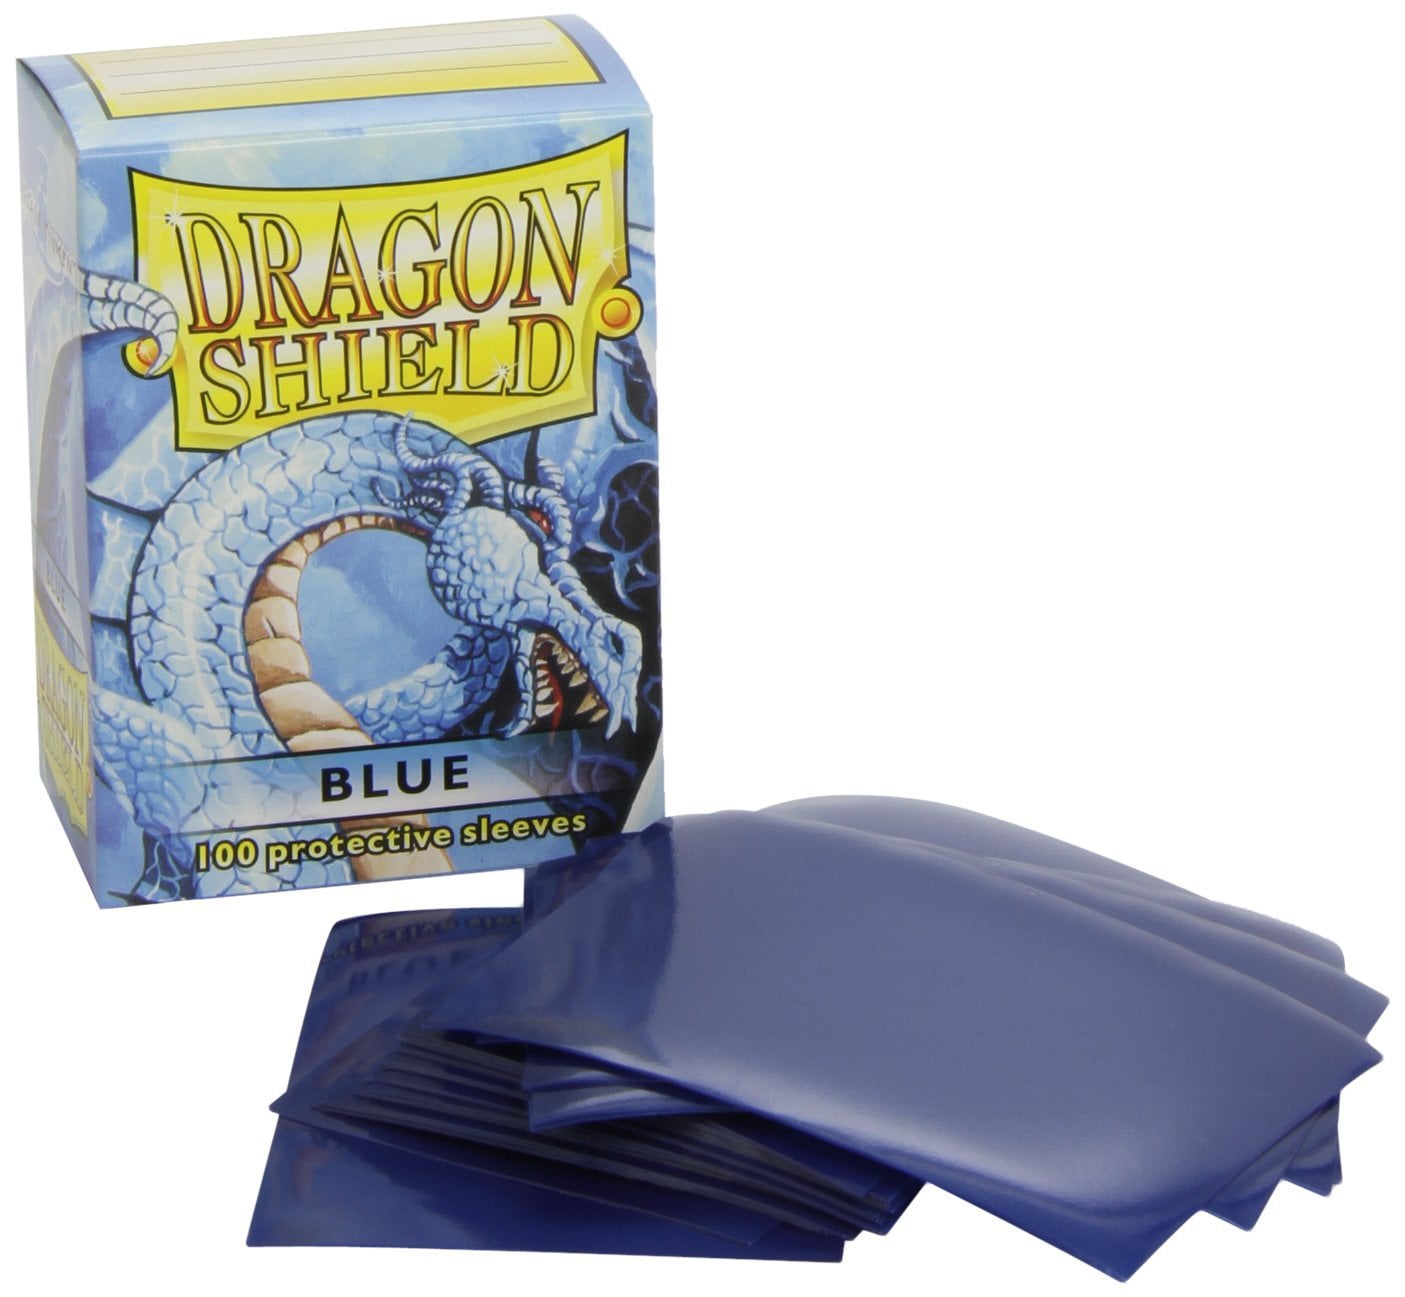 NEW DRAGON SHIELD MATTE BLUE CARD SLEEVES CARD PROTECTION EASE TO SHUFFLING 